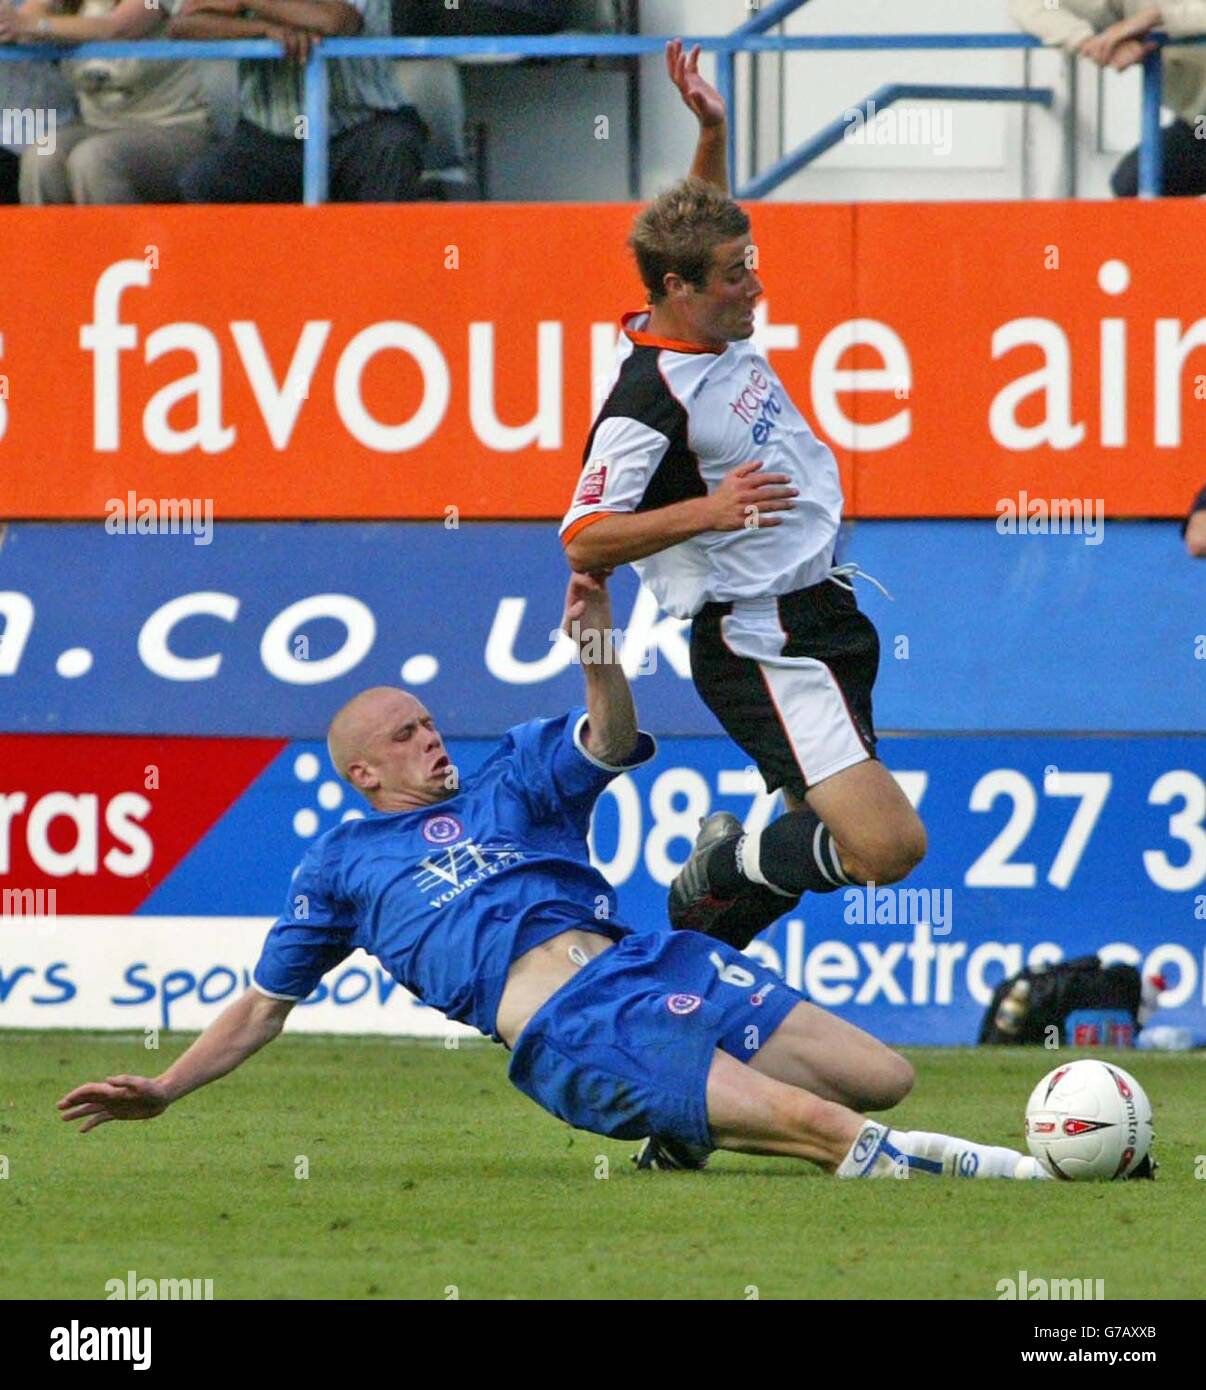 Derek Niven & Michael Leary of Luton Town and Chesterfield, competing during their Coca Cola League One match at Kenilworth Road, Luton Saturday, September 11, 2004. NO UNOFFICIAL CLUB WEBSITE USE. Stock Photo